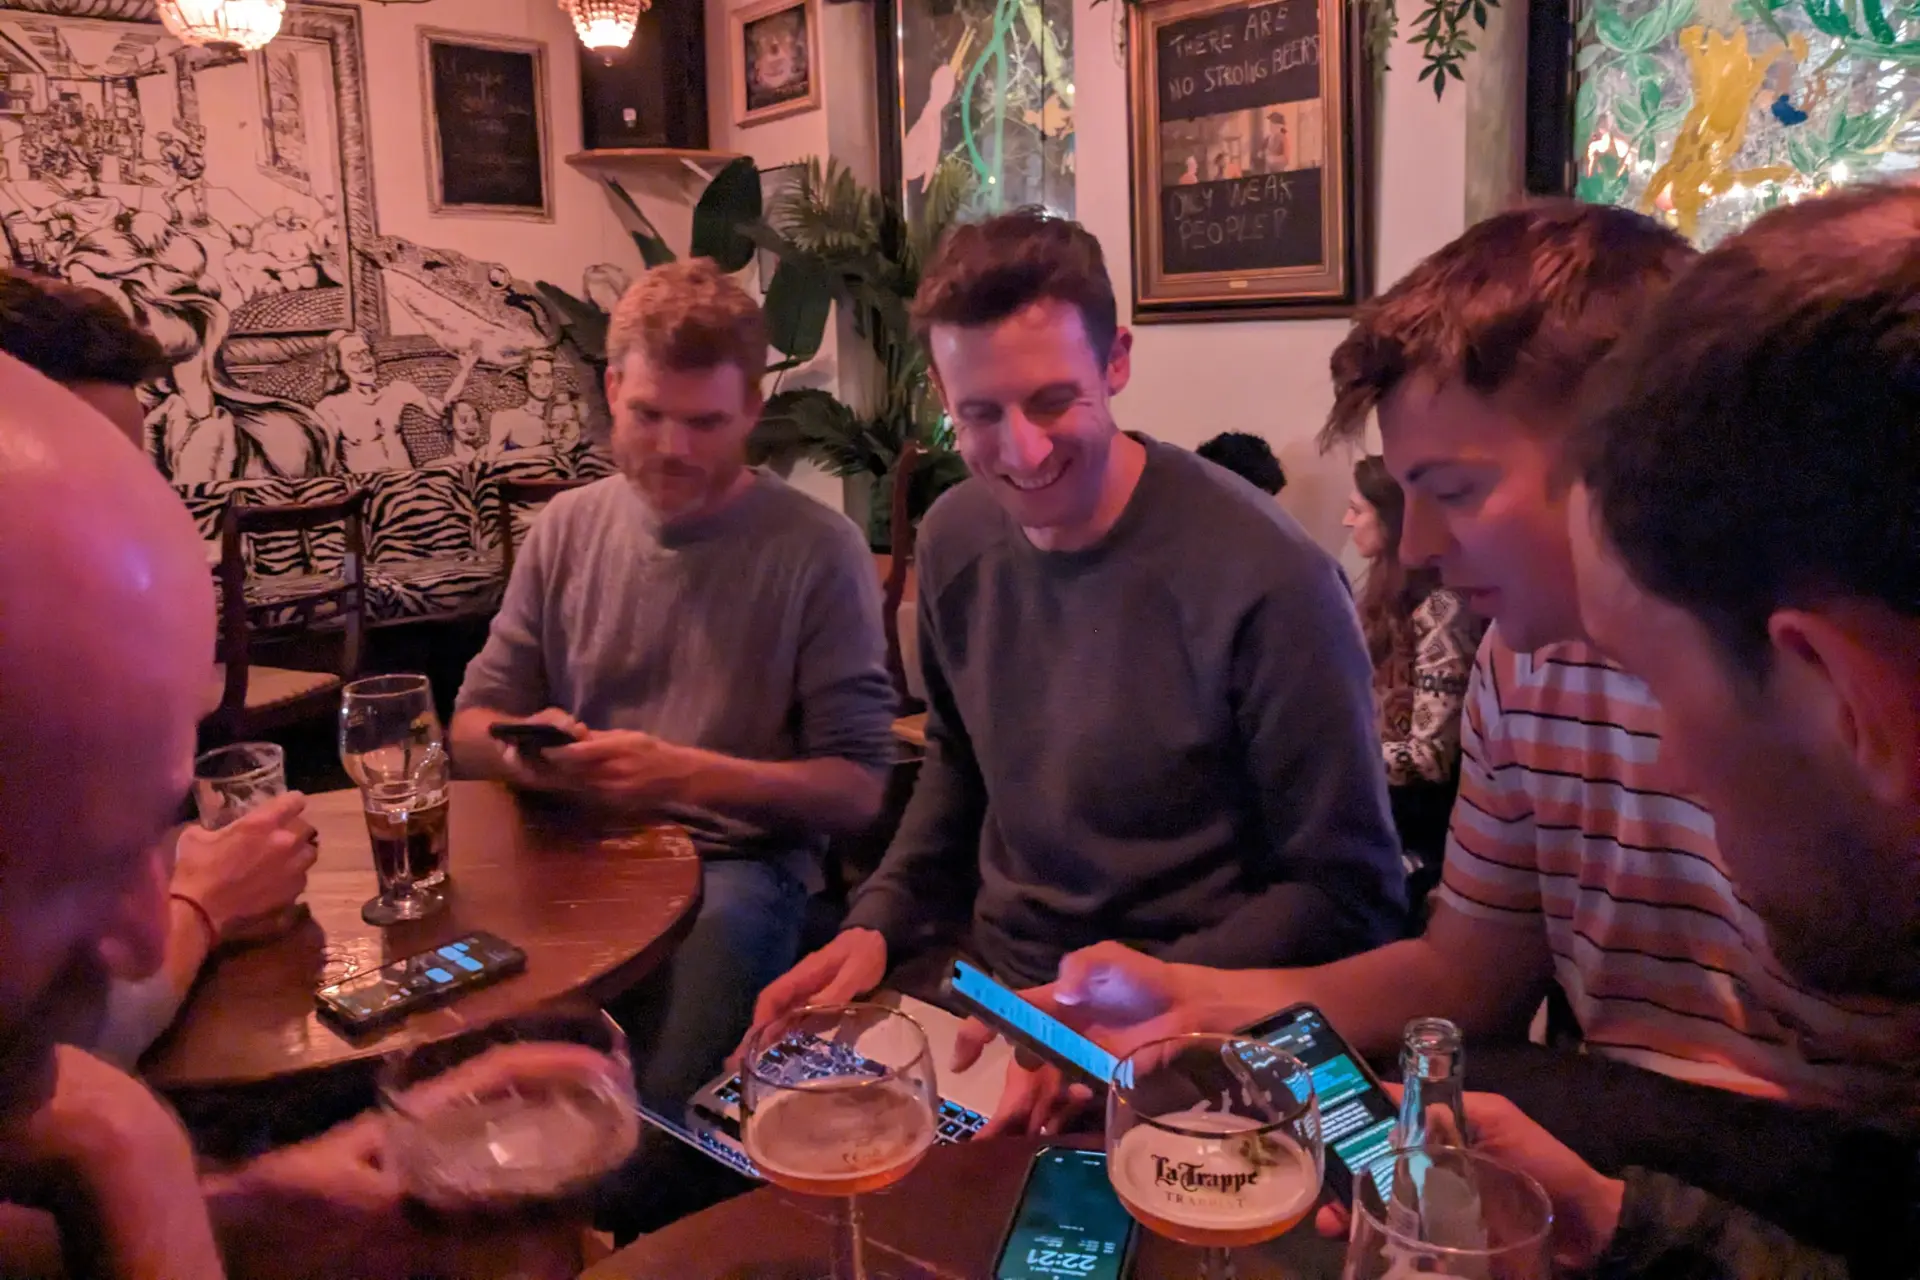 Several people are gathered around two small tables. They are working intently on their phones and laptops and drinking beer